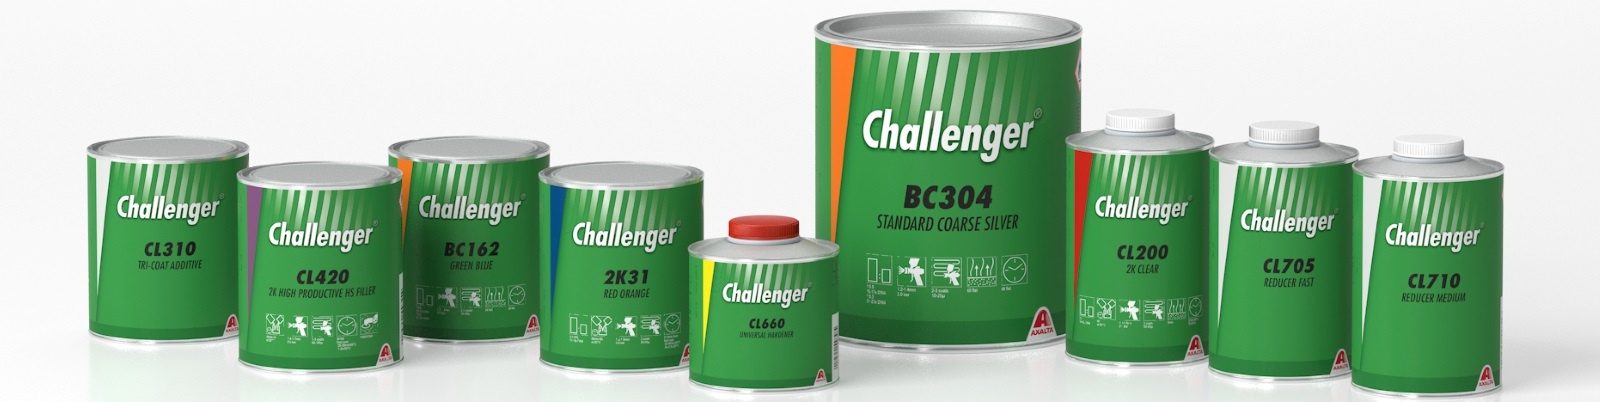 Image of challenger products